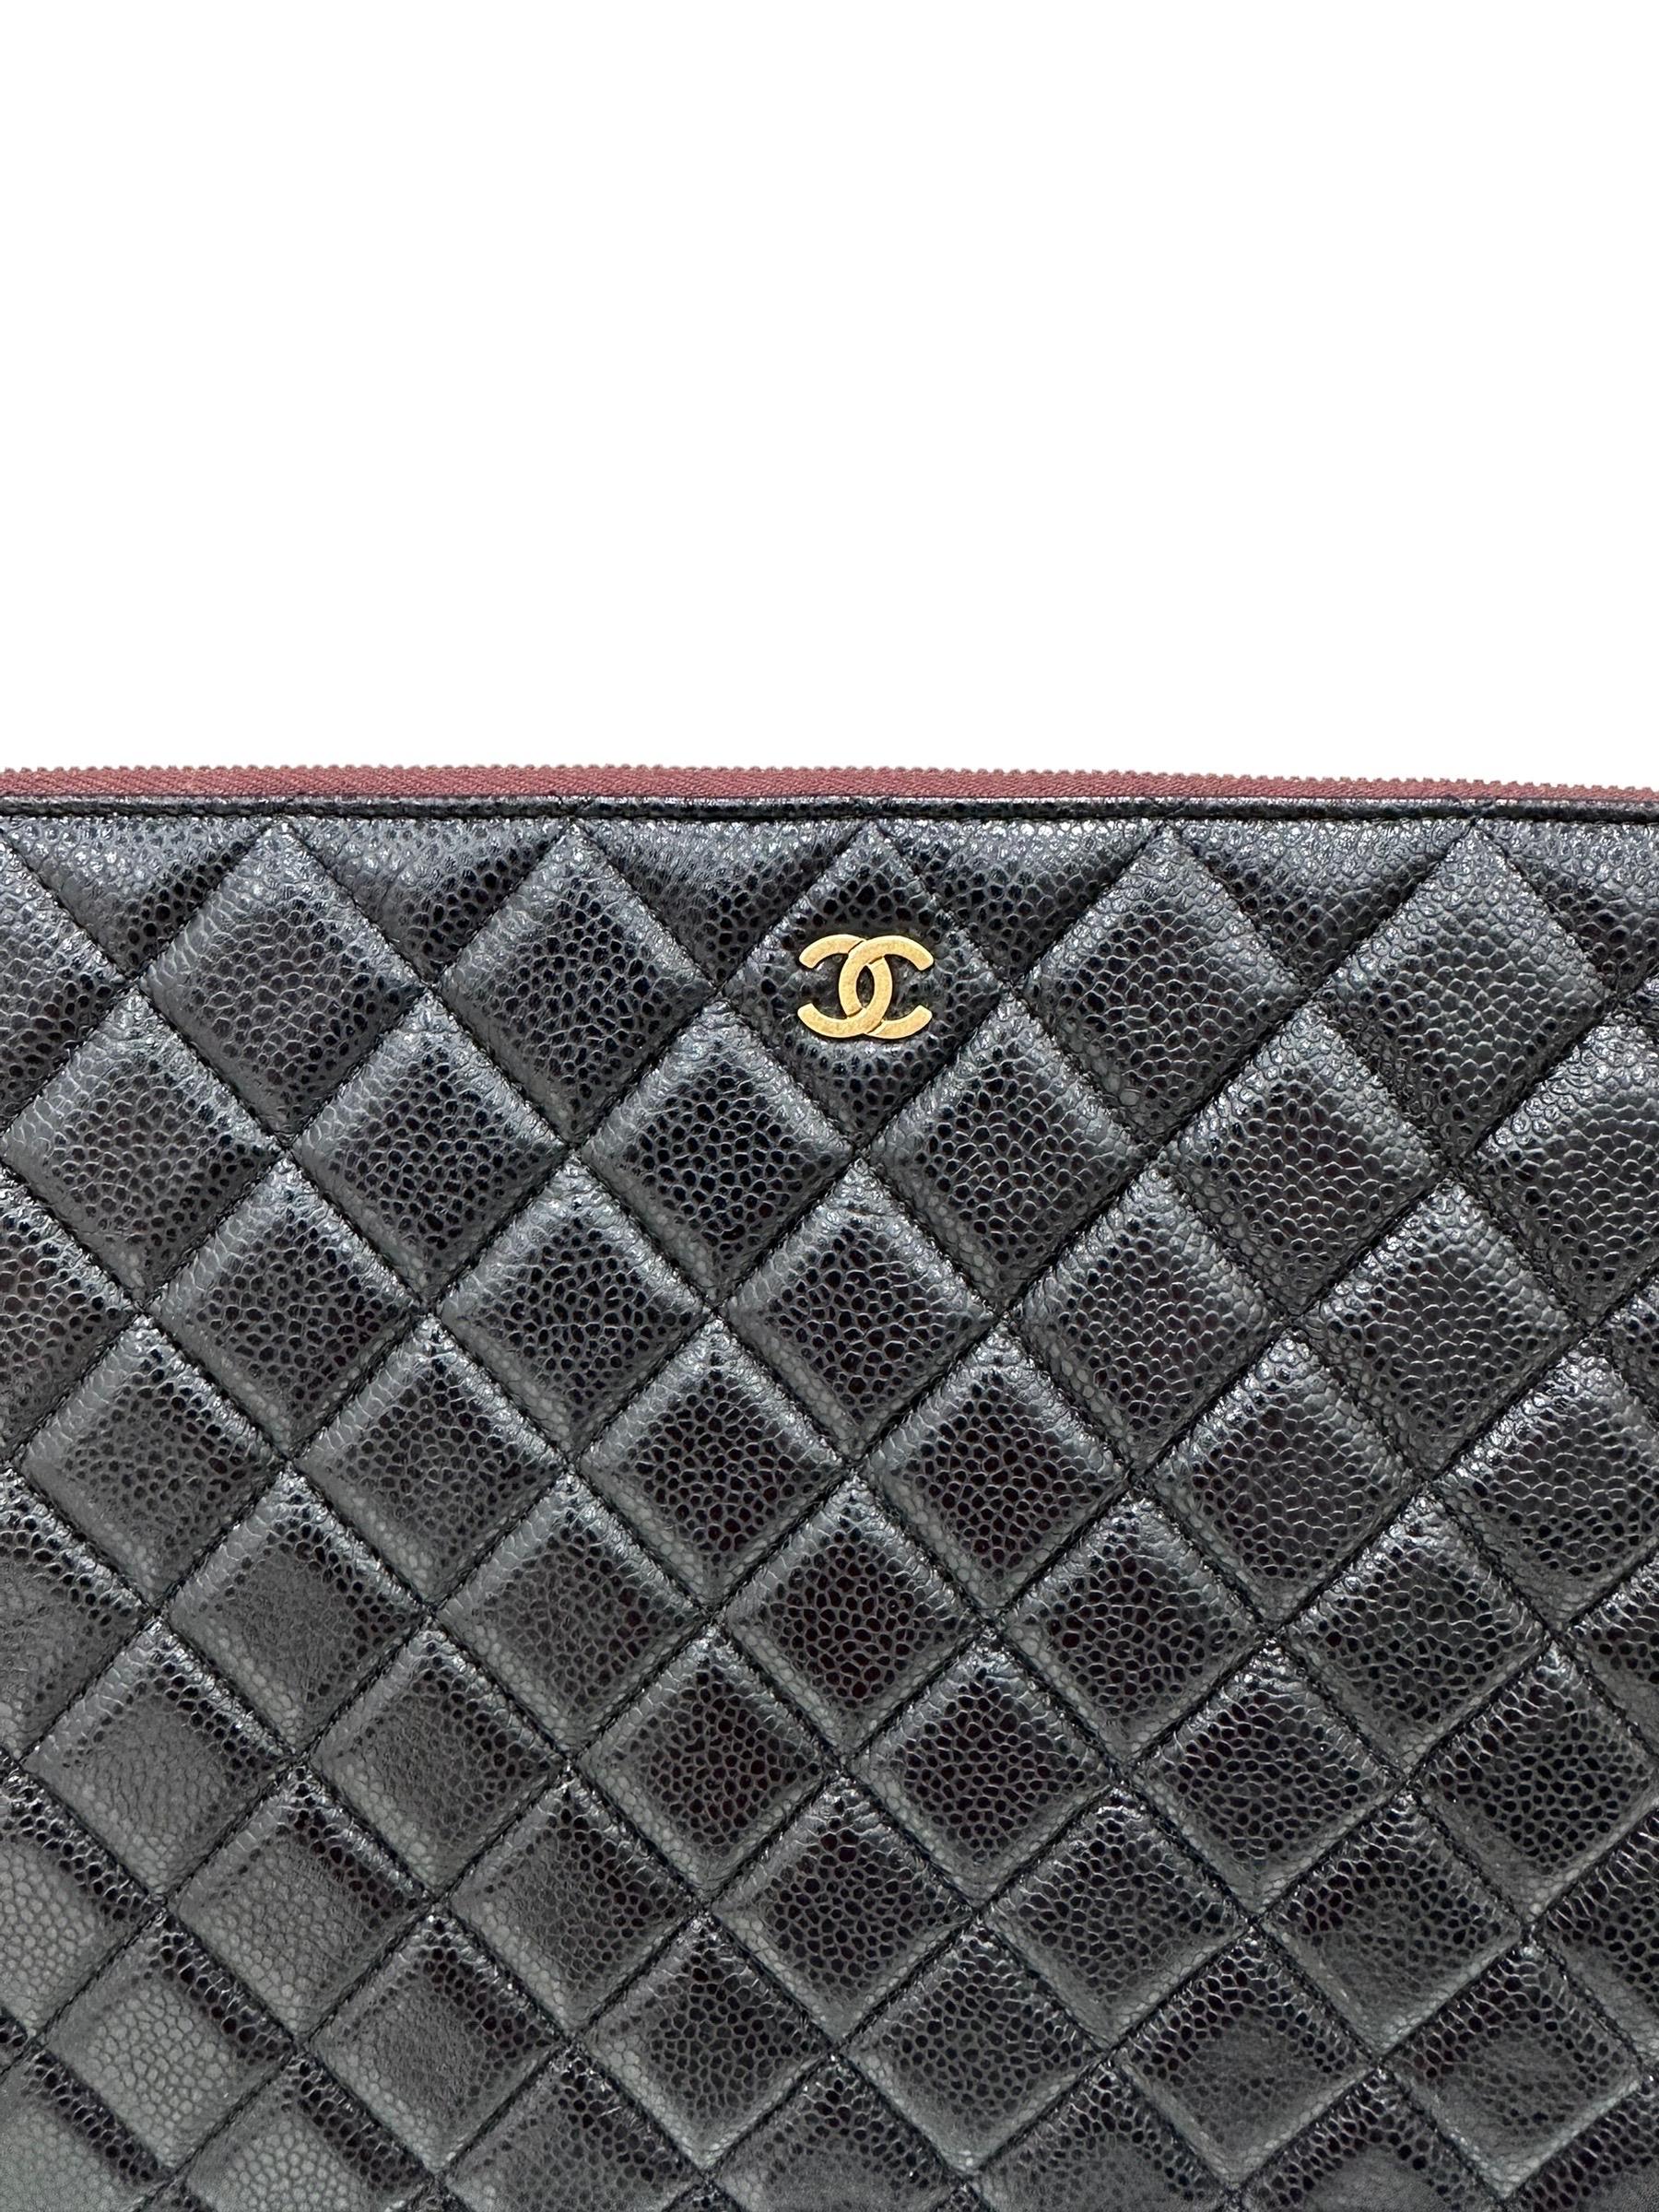 Clutch signed Chanel, Timeless model, made of black grained leather with golden hardware. Equipped with a top closure with zip, internally lined in burgundy quilted fabric, roomy for the essentials. It has no handle. Year of production 2015/16. It